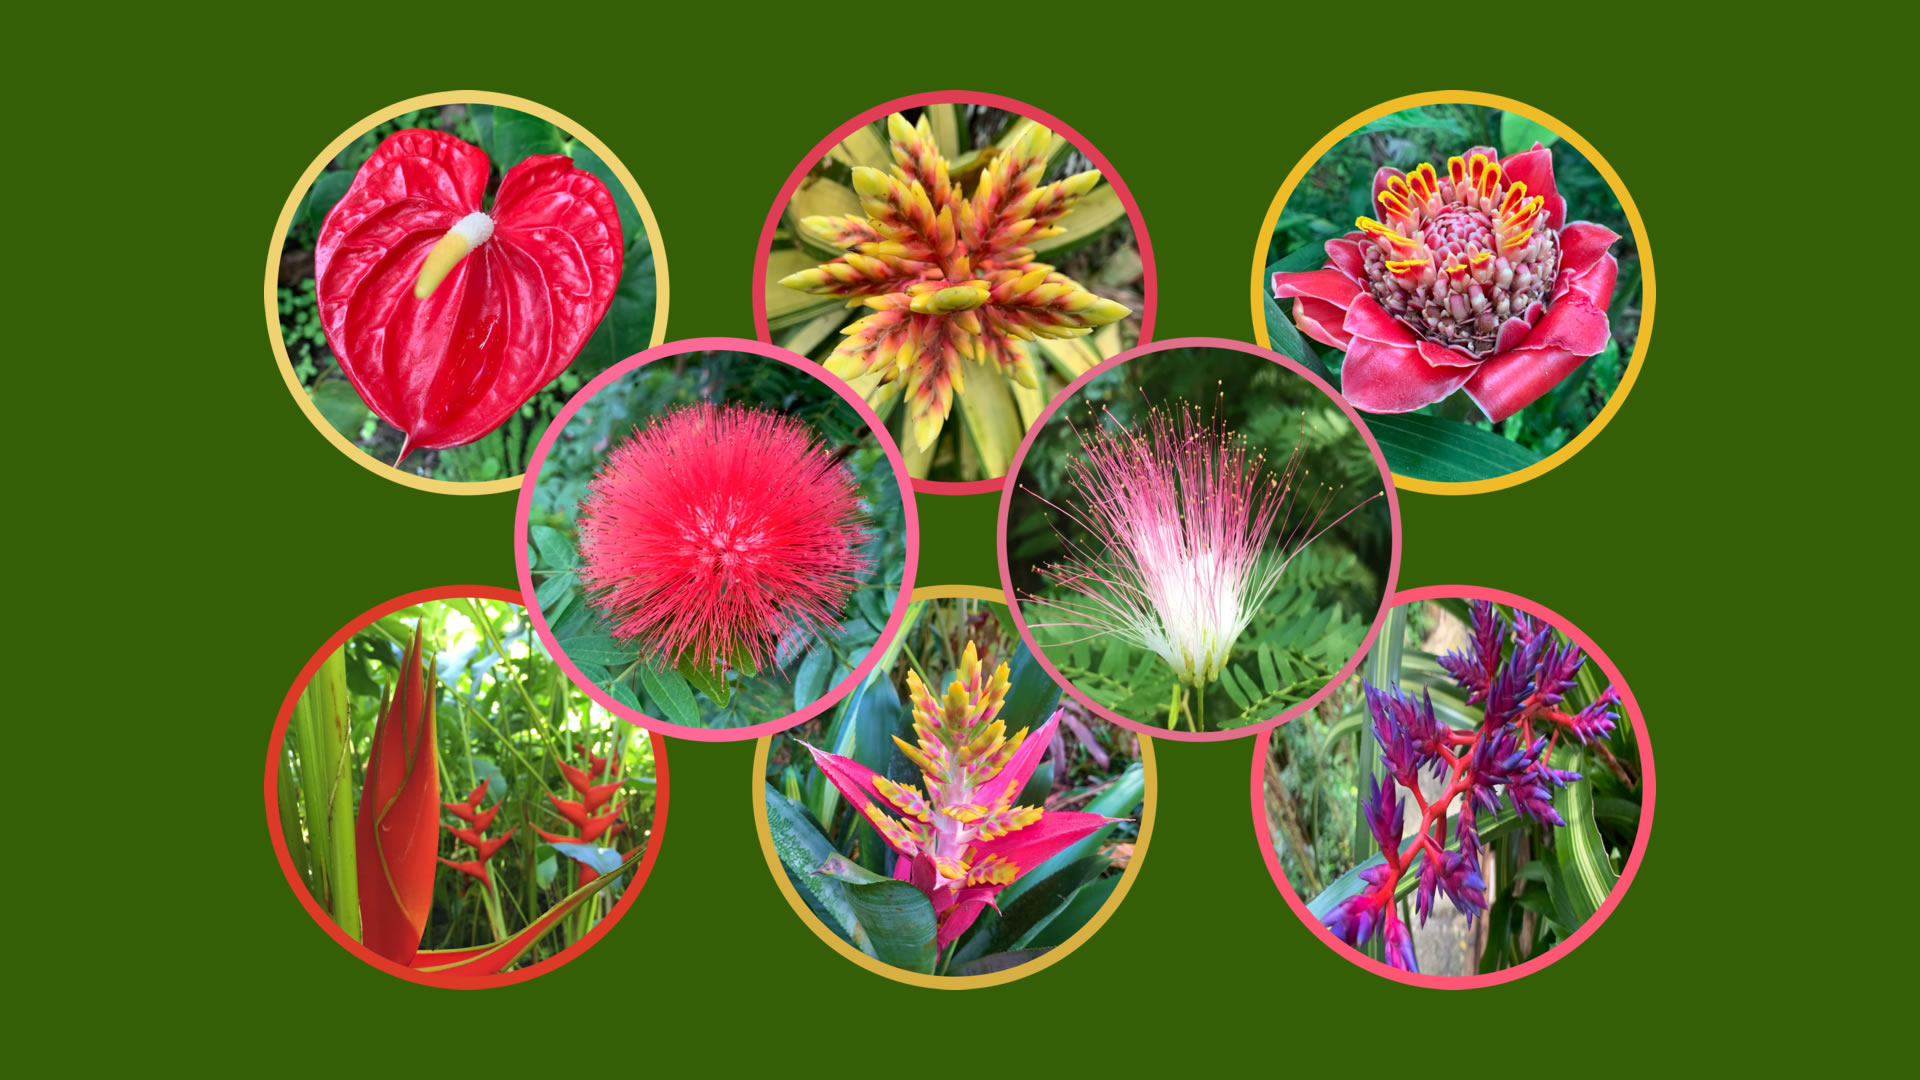 Collage of tropical flowers